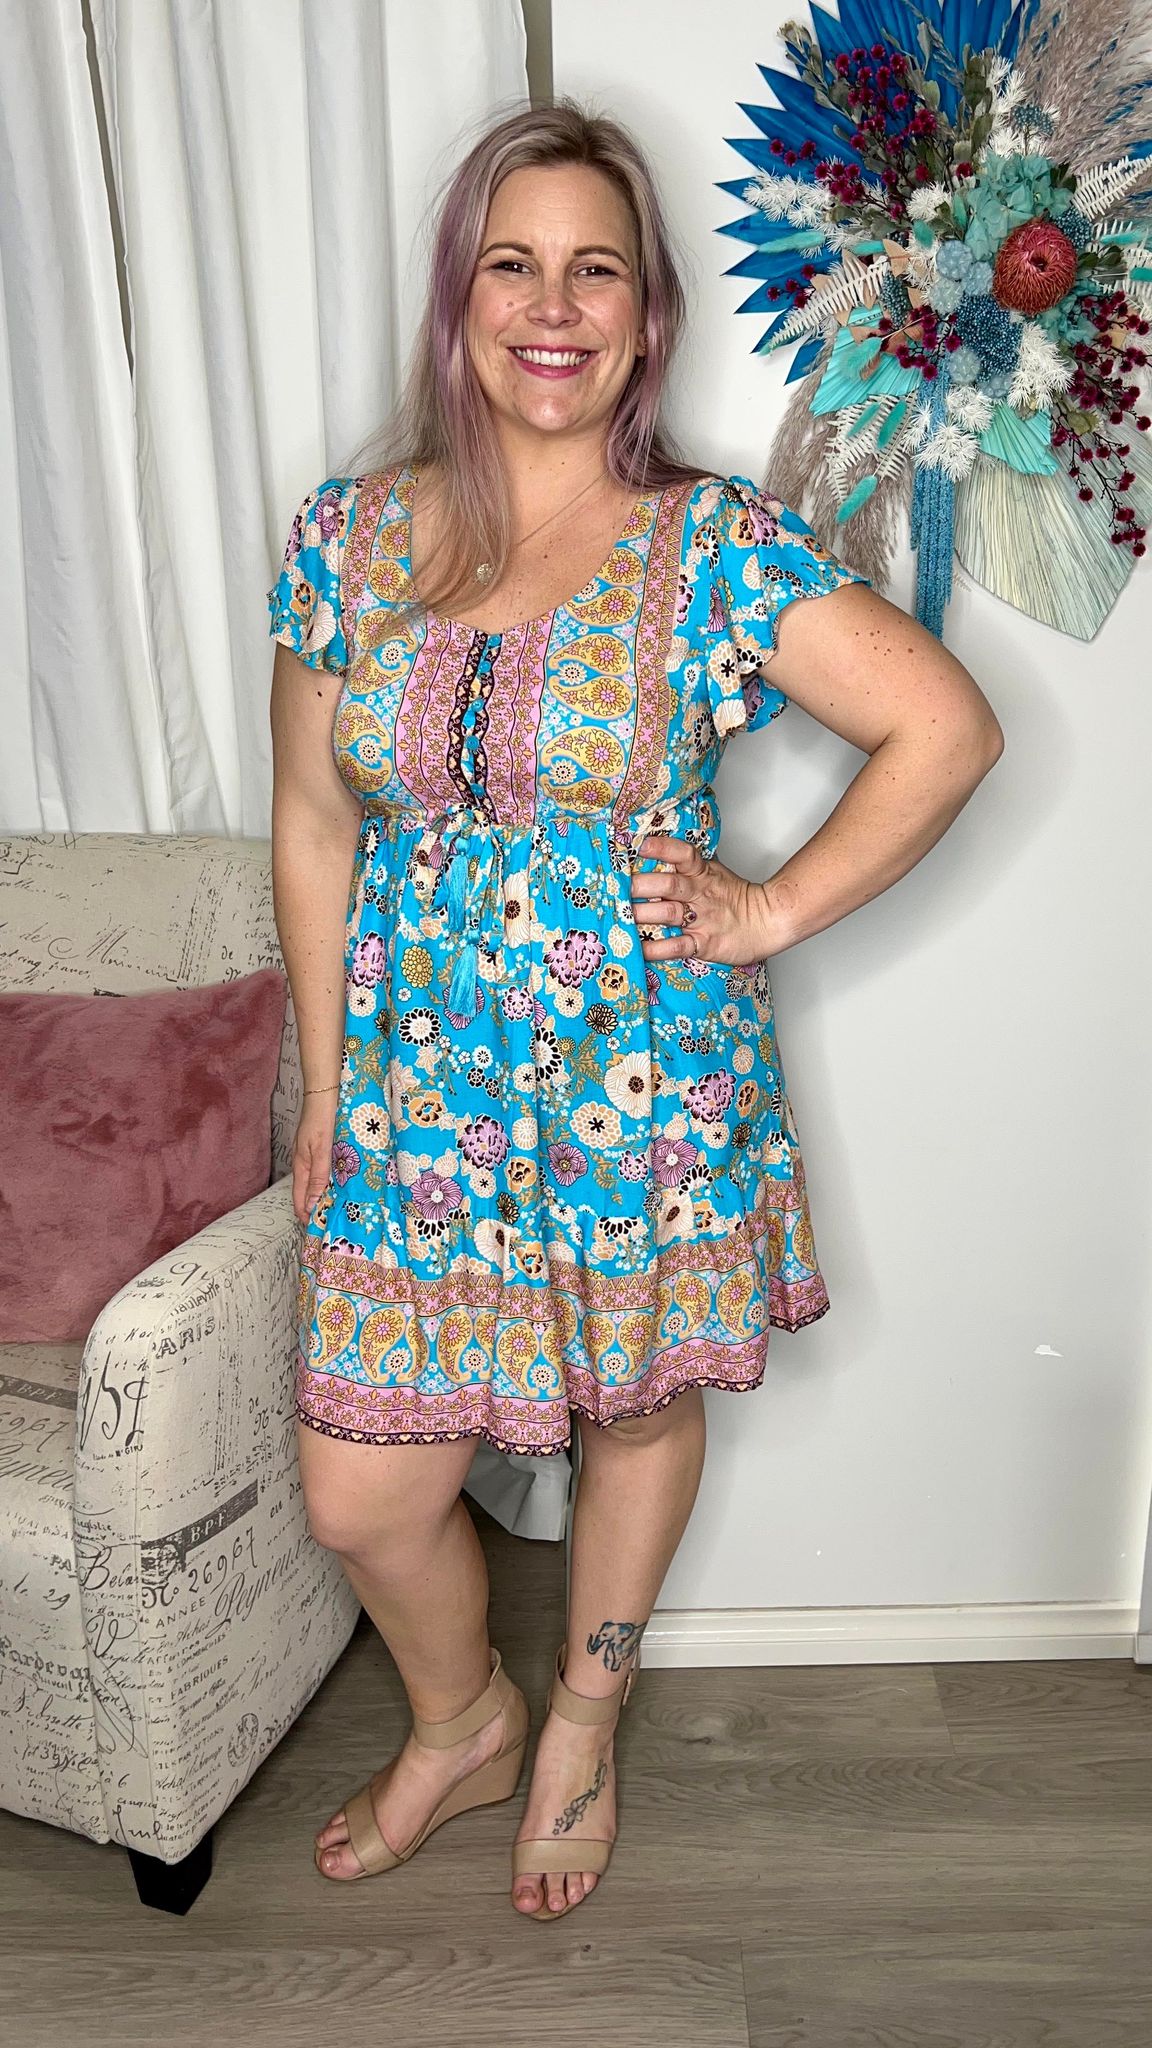 Milla Dress: This sweet little boho dress is such an easy “chuck on and go” style that will make you feel oh so pretty

Functional buttons at bust
Drawstring waist
Prewashed rayo - Ciao Bella Dresses 